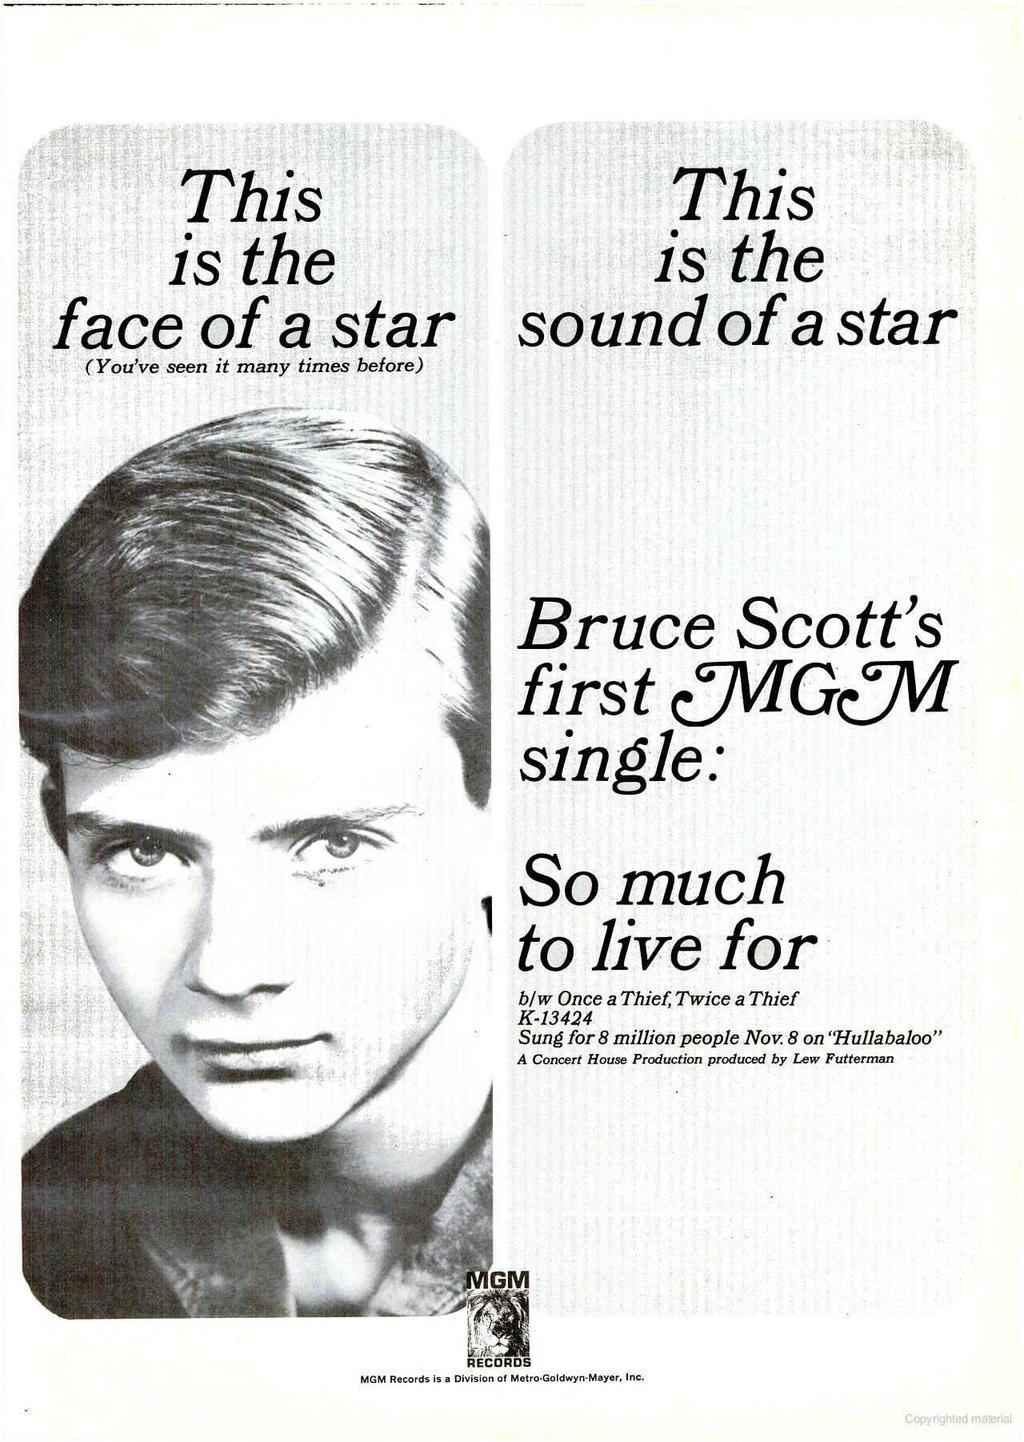 This is the This is the face of a star sound of a star (You've seen it many times before) Bruce Scott's first WIGCYVI single: So much to live for b/w Once a Thief, Twice a Thief K